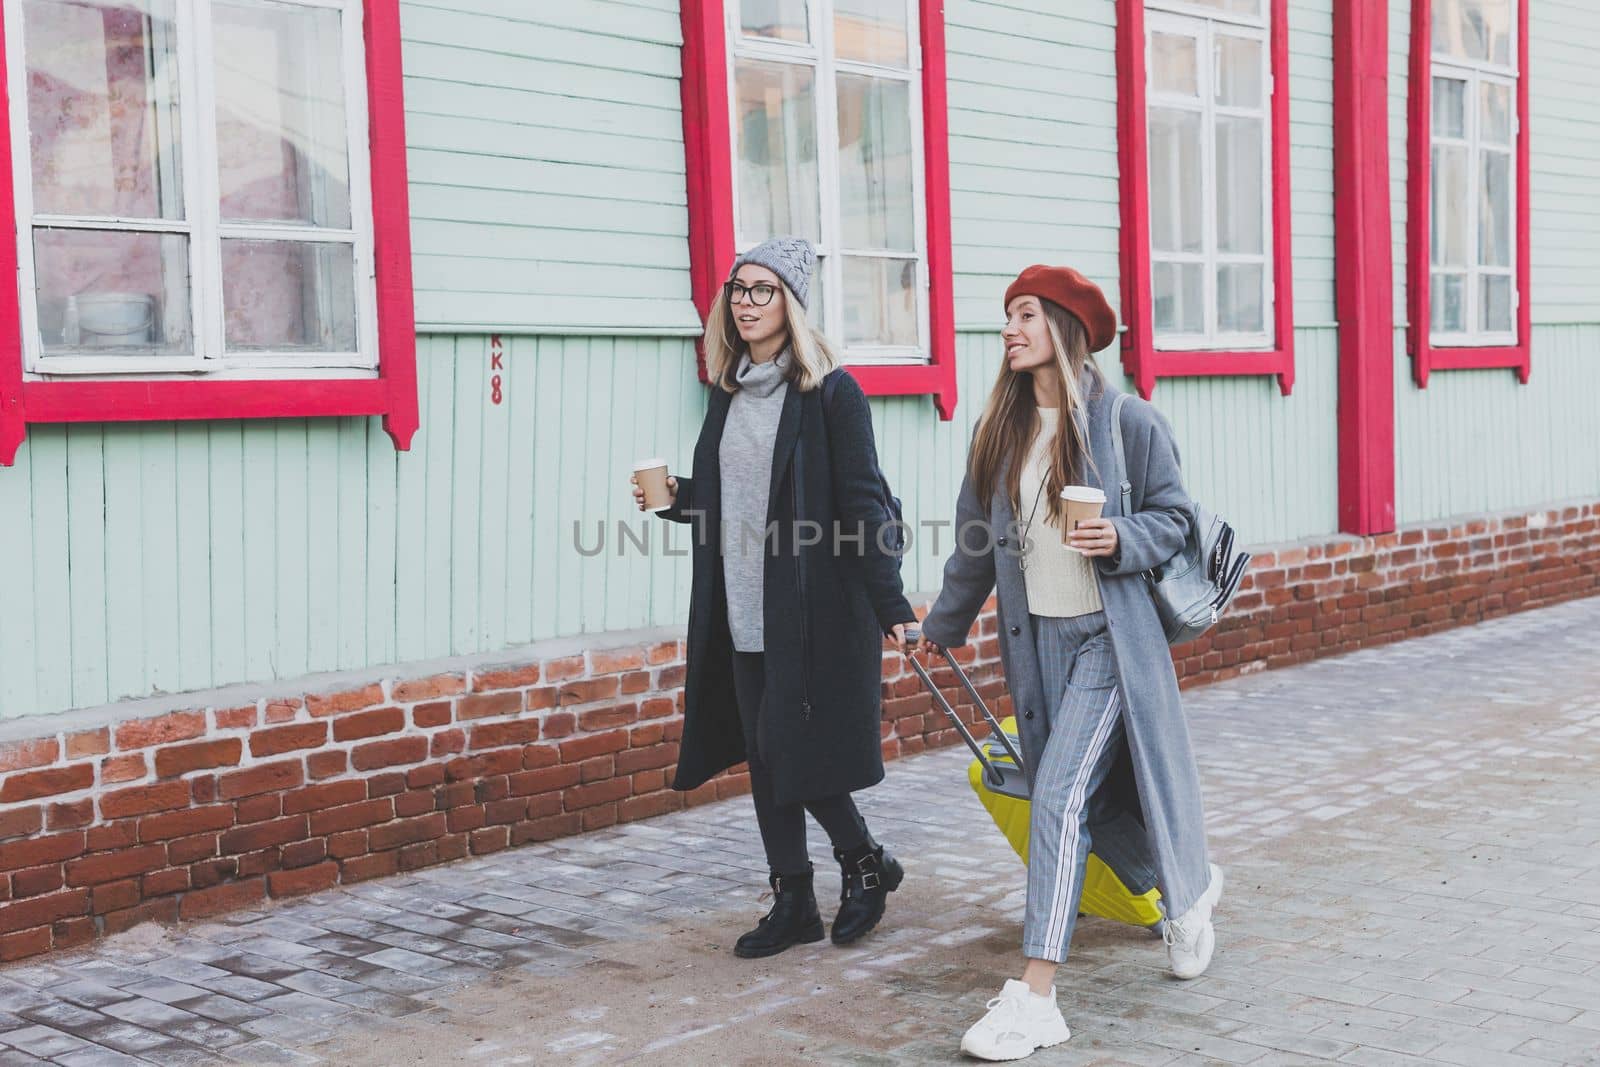 Two cheerful tourist women smiling and walking with suitcases on city street in autumn or spring time - travel and vacation concept by Satura86